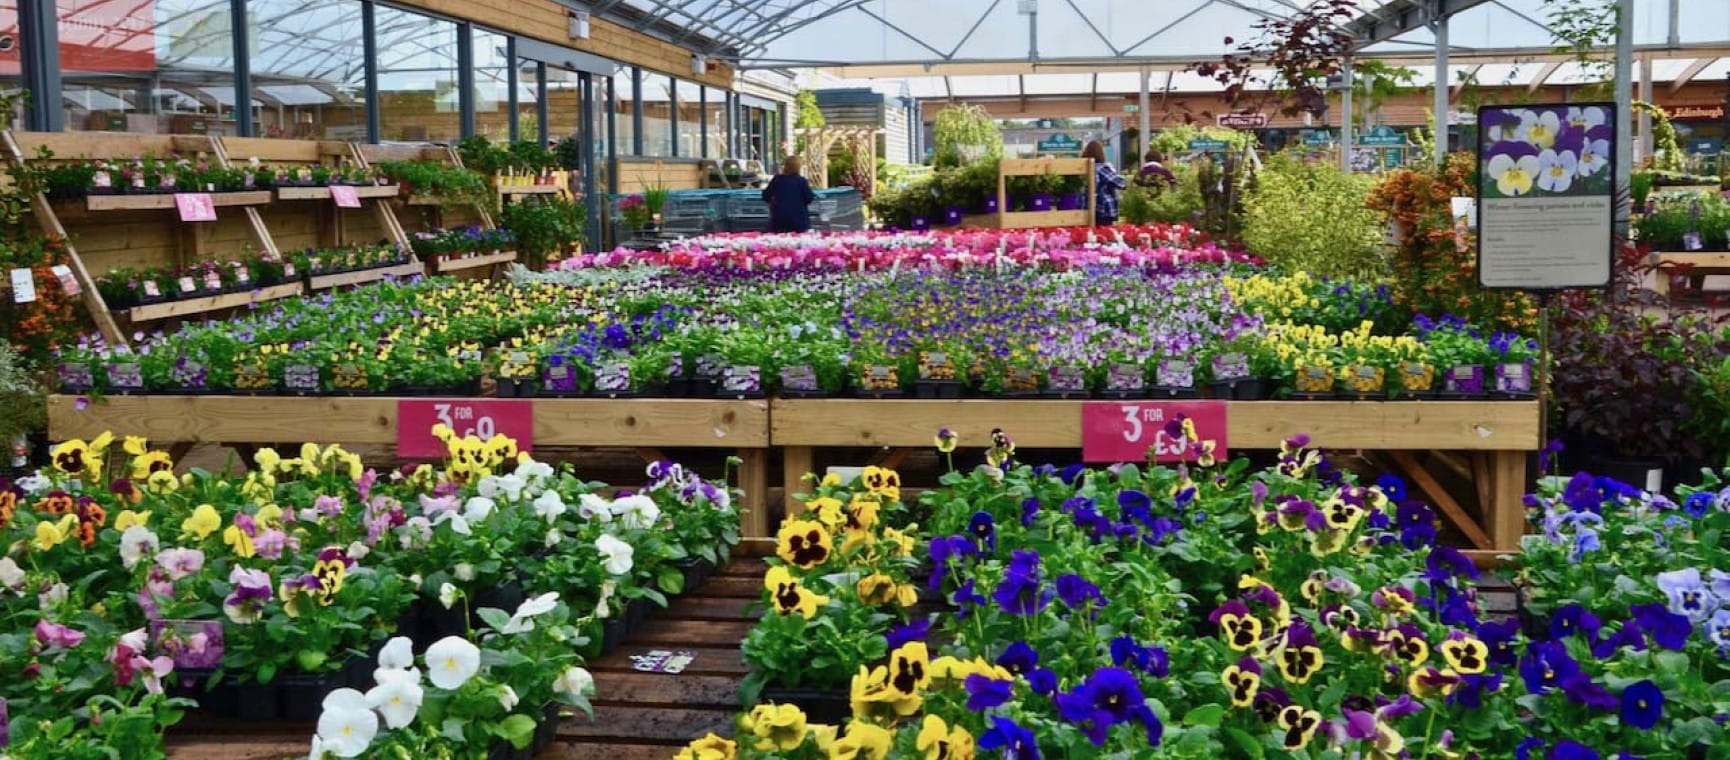 A garden centre display filled with colourful flowers |  Shutterstock/ Edinburgh City Mom